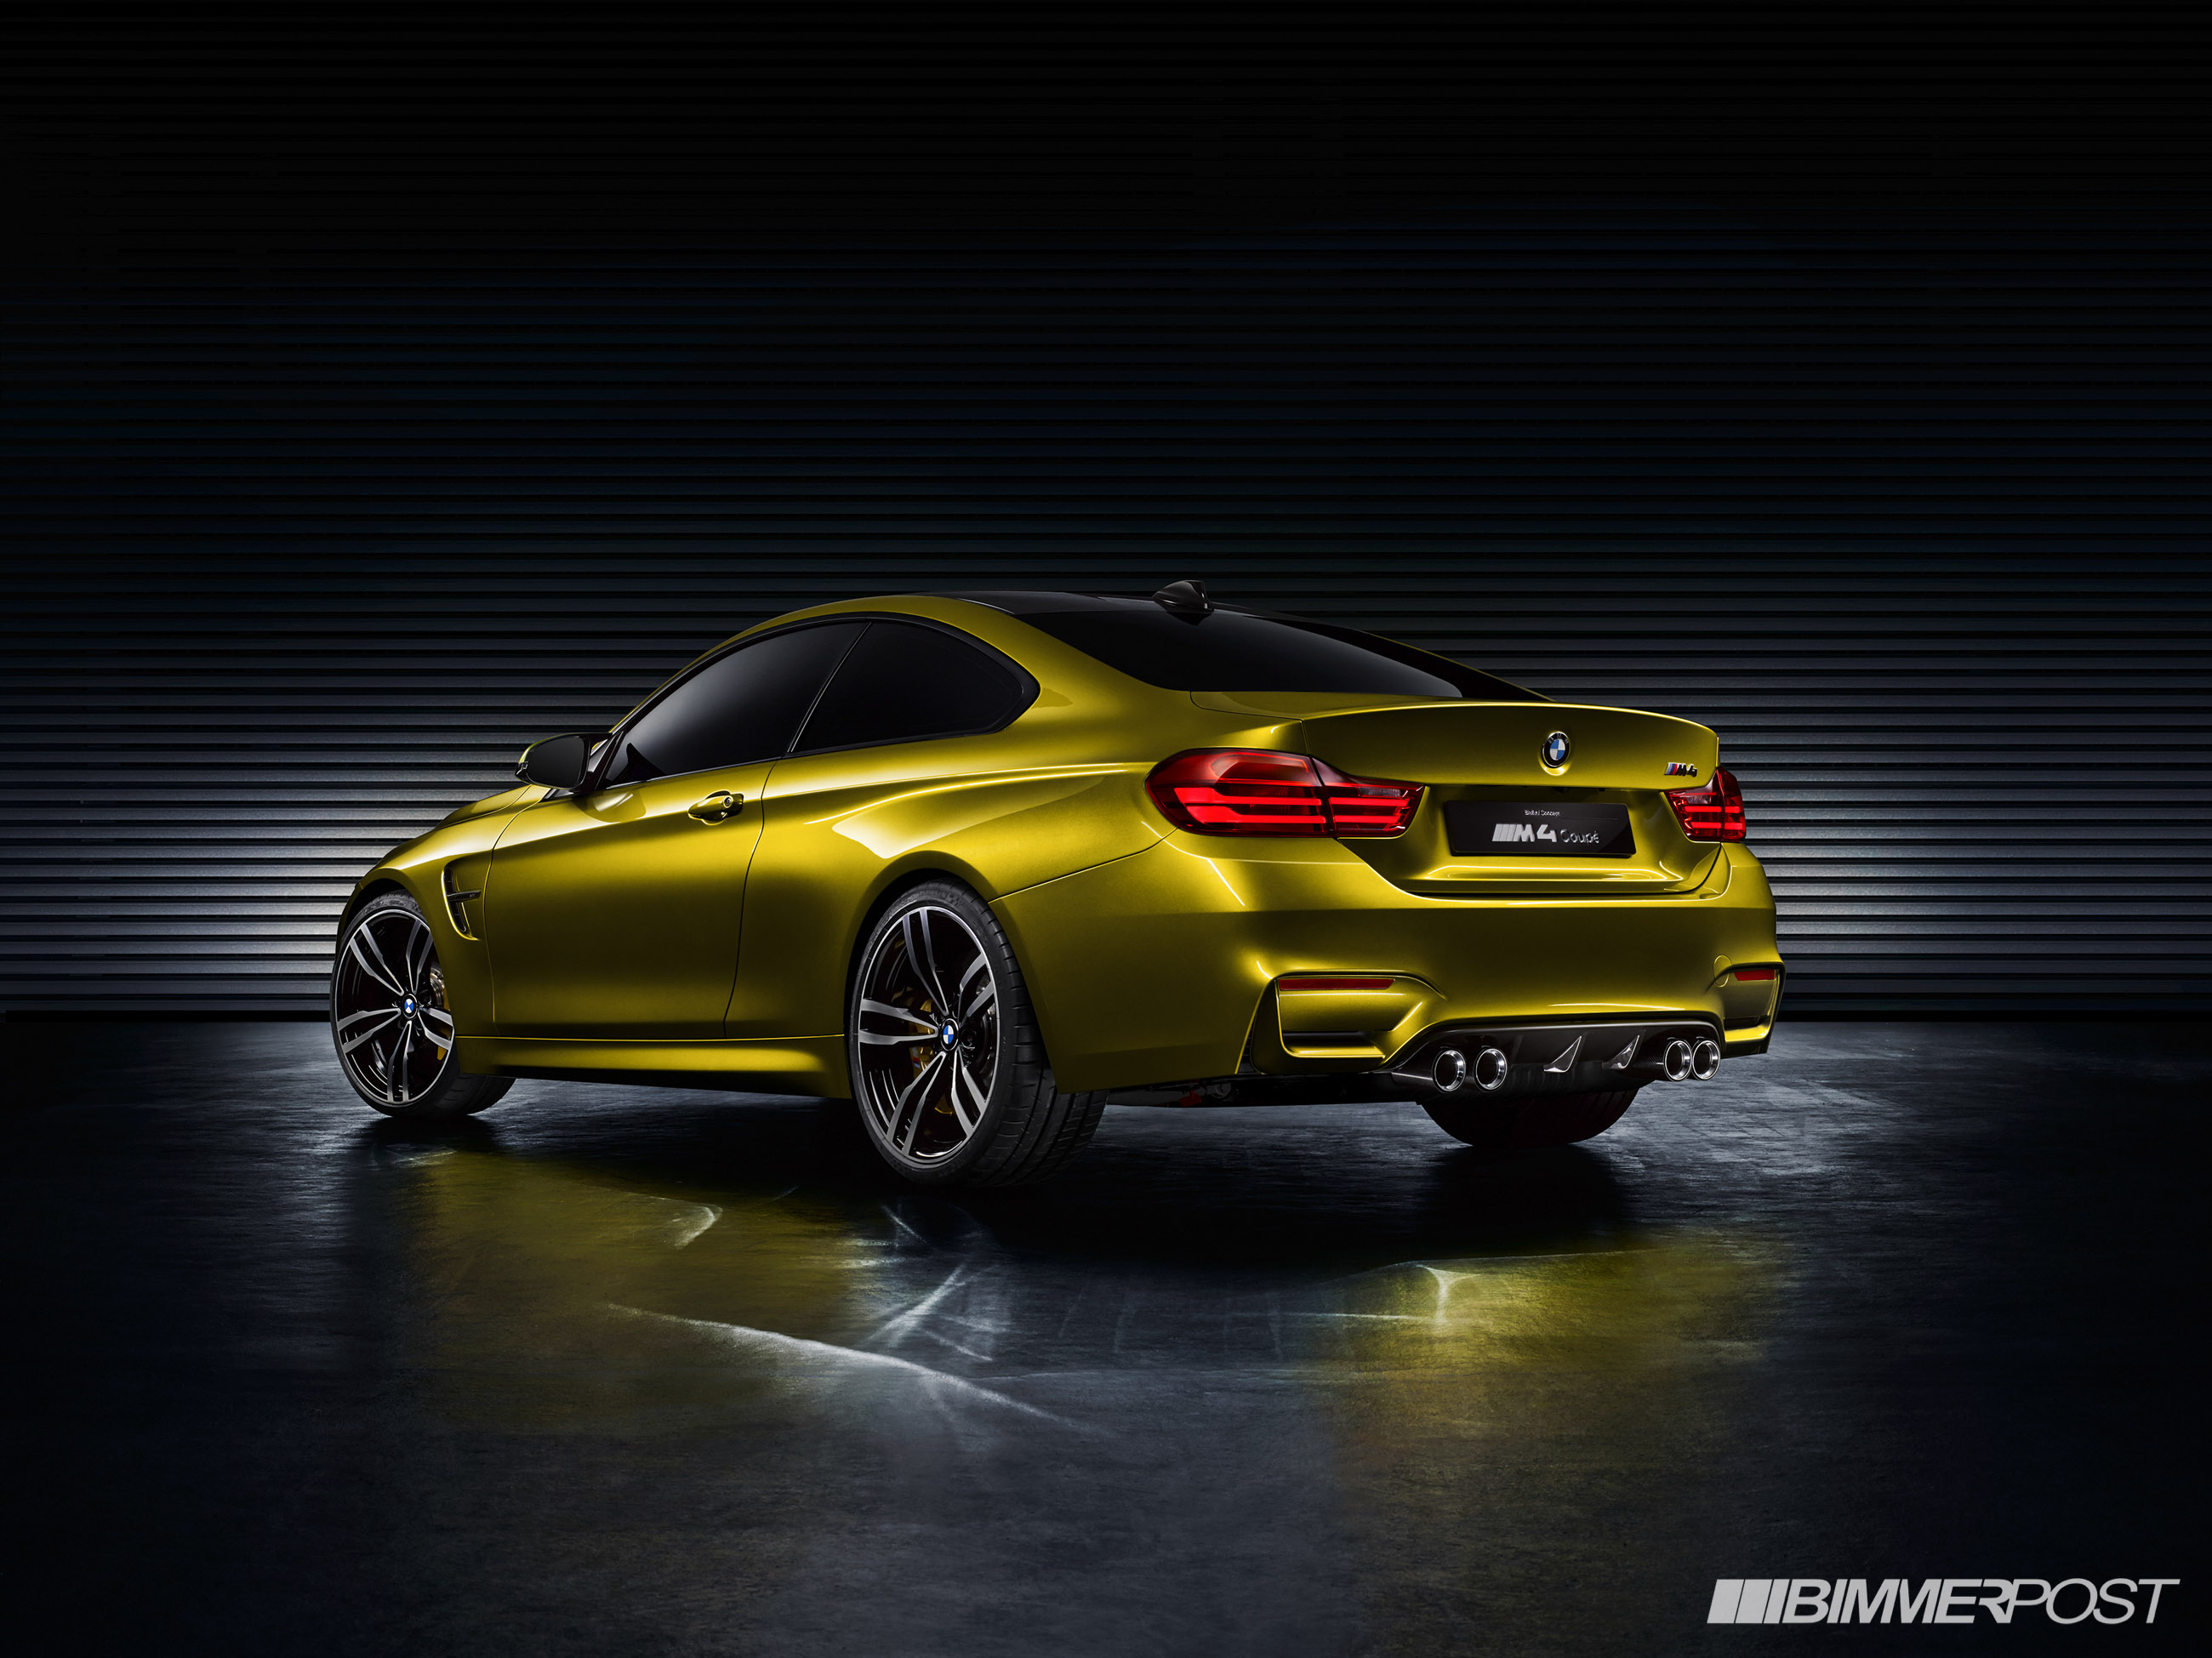 BMW%20Concept%20M4%20Coupe%20(3).jpg